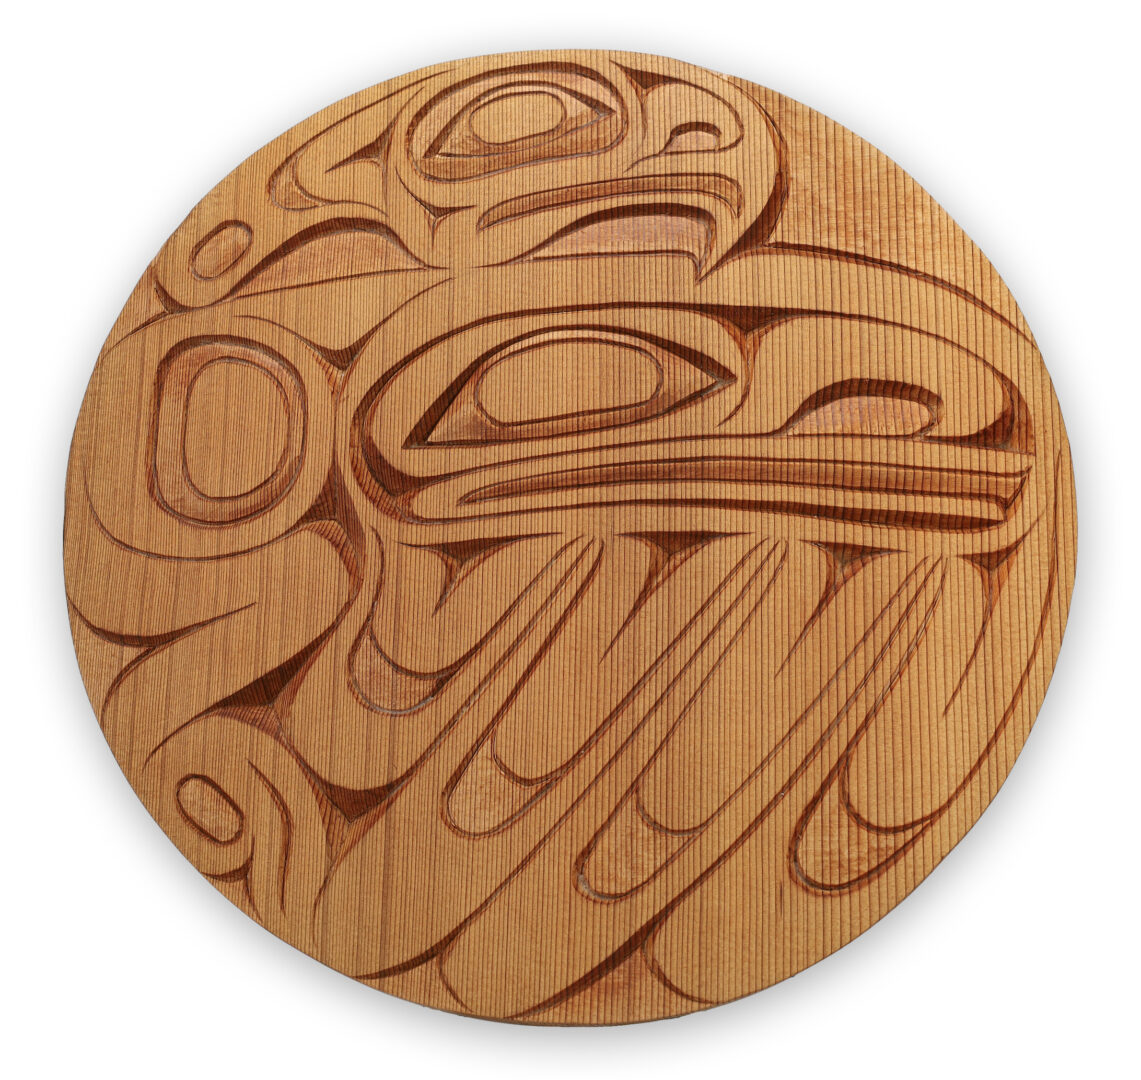 One original hand-carved panel by Nuu-chah-nulth artist Guy Louie Jr. One thunderbird panel carved out of cedar wood.